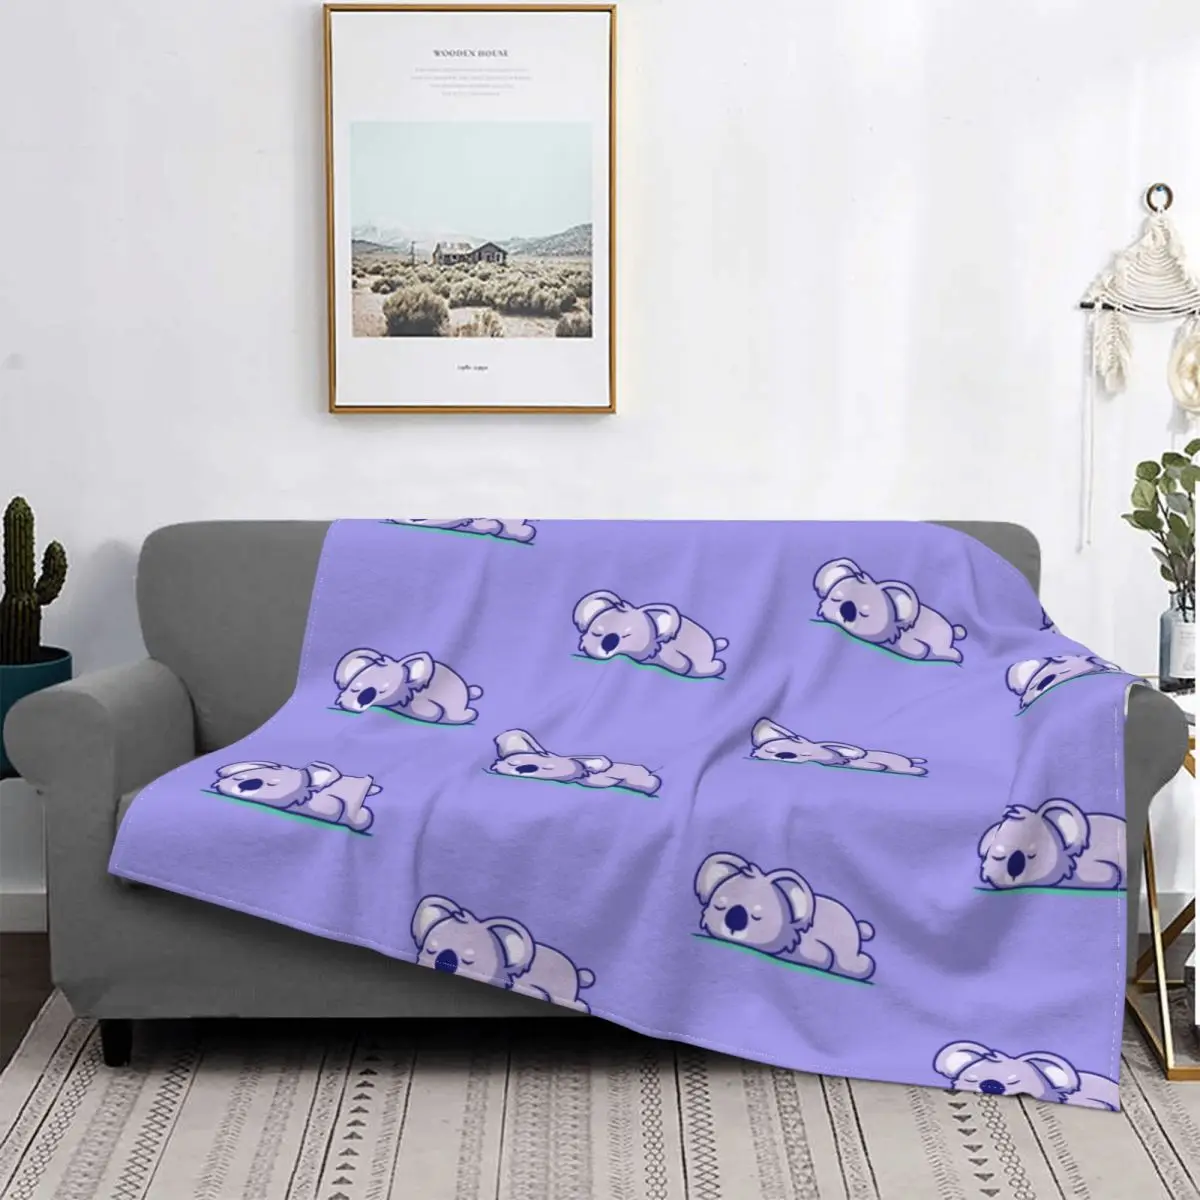 

Koala Cute Blankets Flannel Textile Decor Australian Animals Multi-function Super Soft Throw Blankets for Bed Couch Quilt